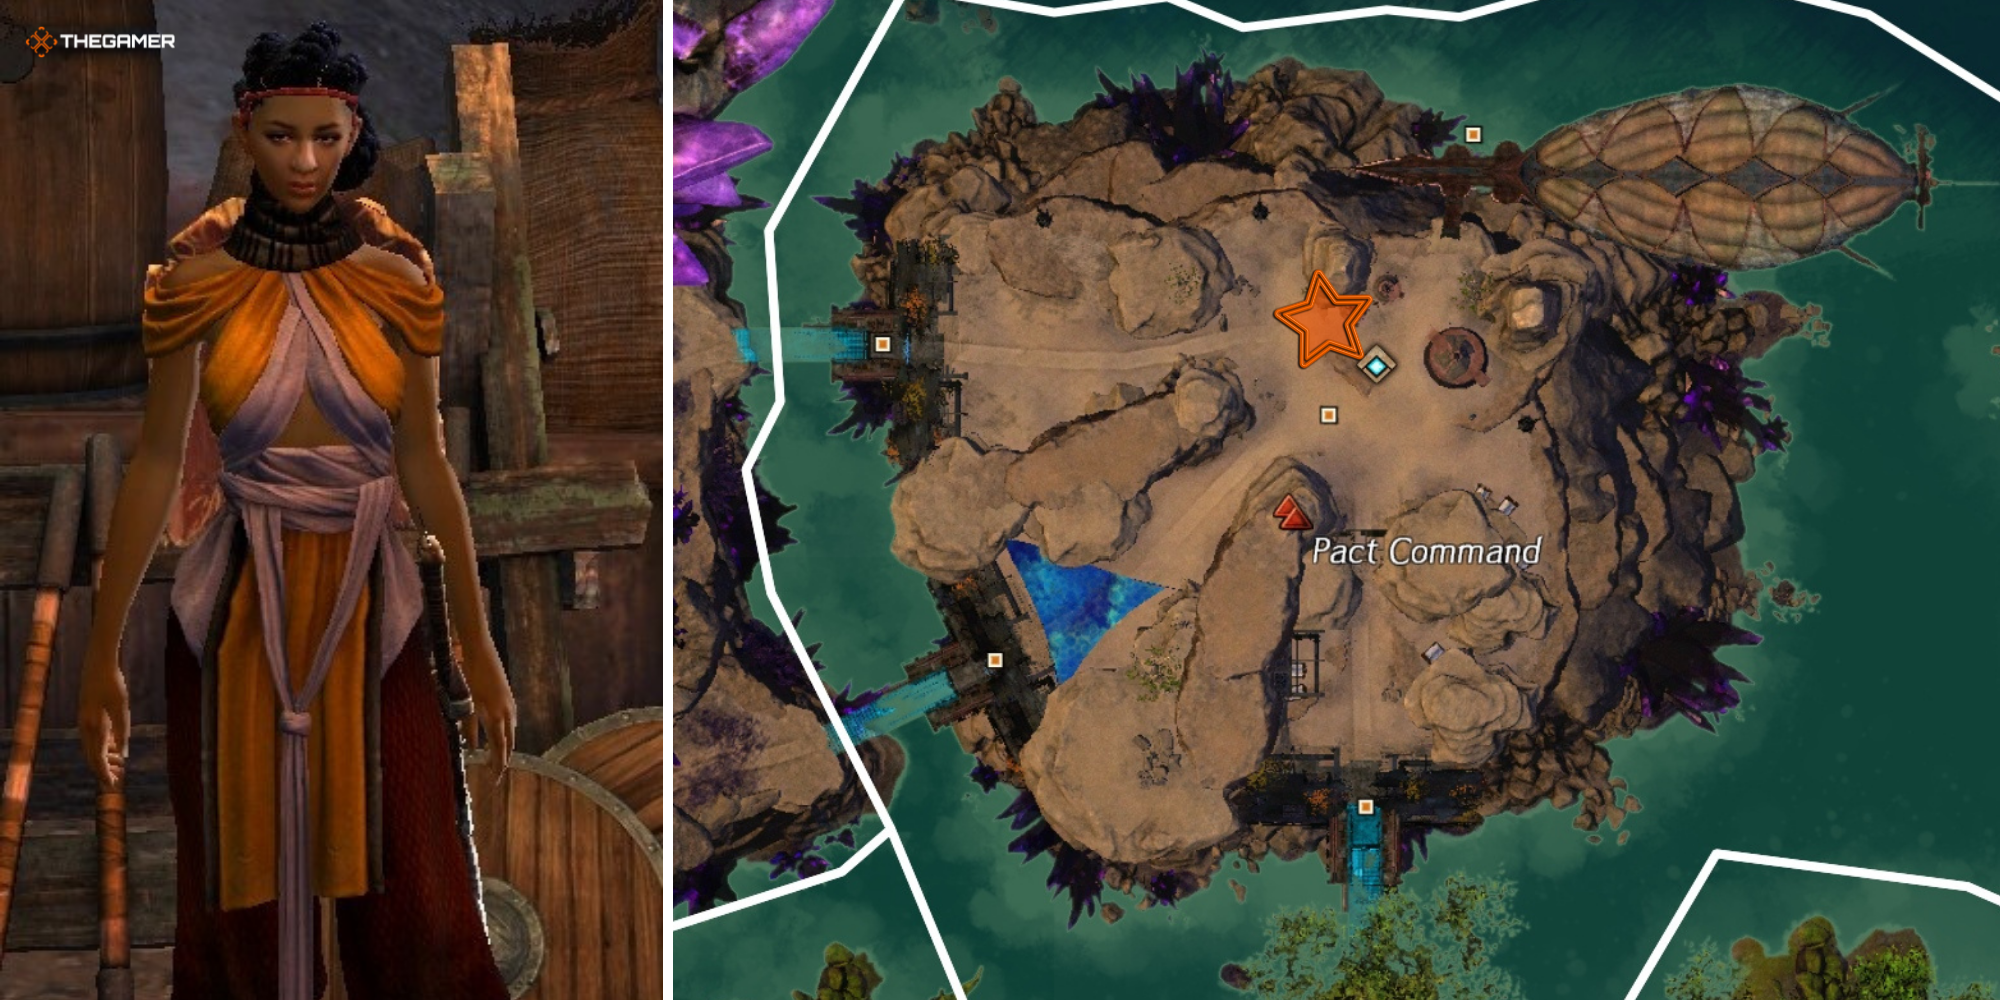 guild-wars-2-split-image-of-dragonfall-map-on-right-with-star-indicating-the-traveling-elonian-merchant-left-image-of-npcs-4174624